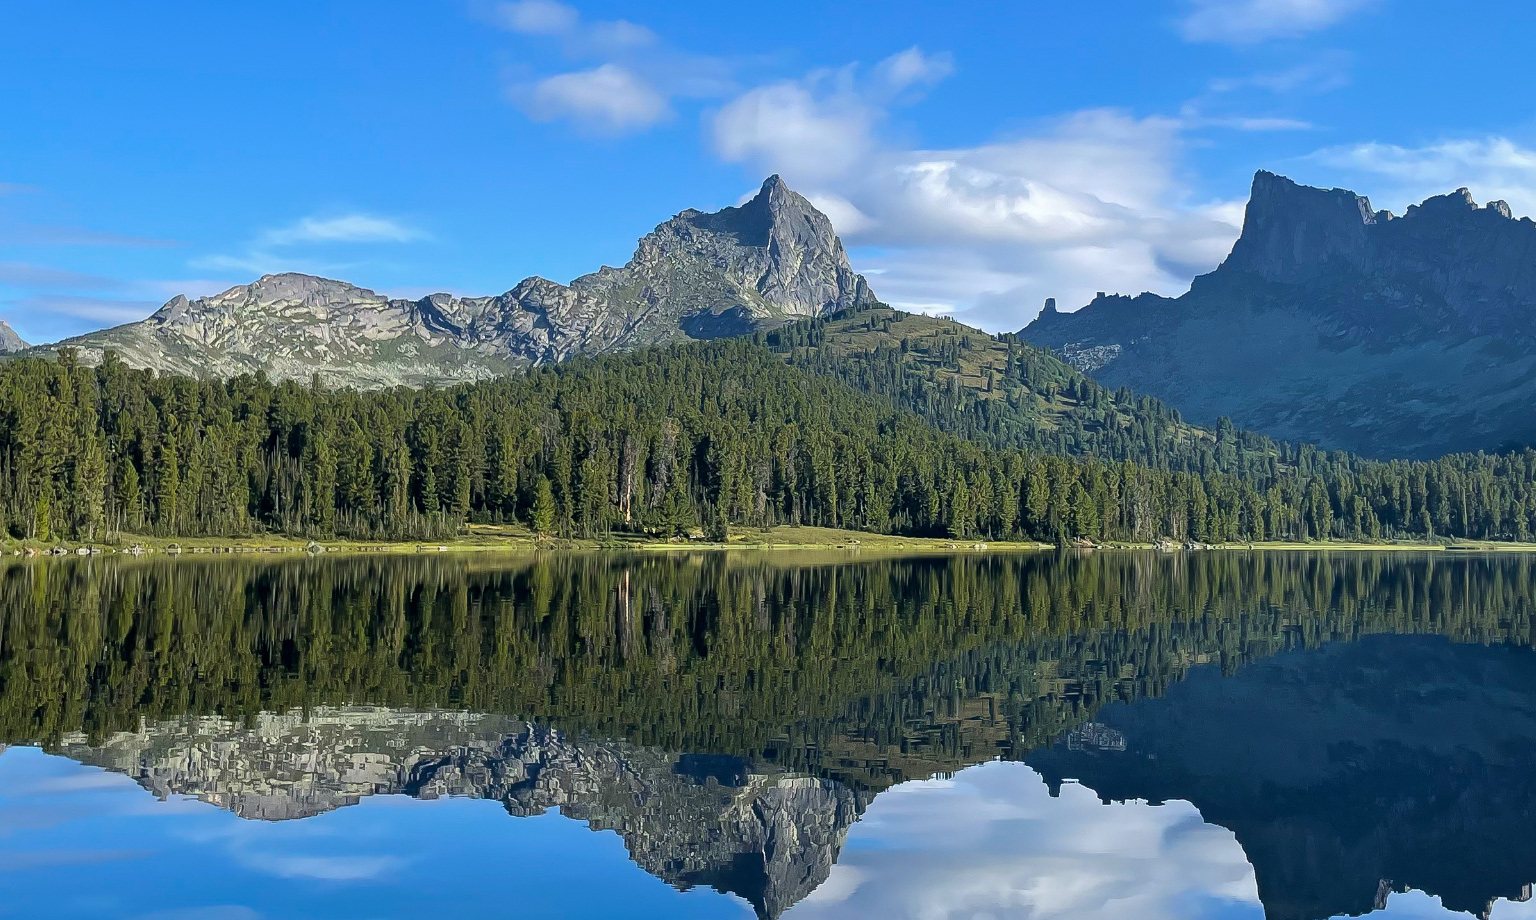 mountains and trees reflecting in a lake